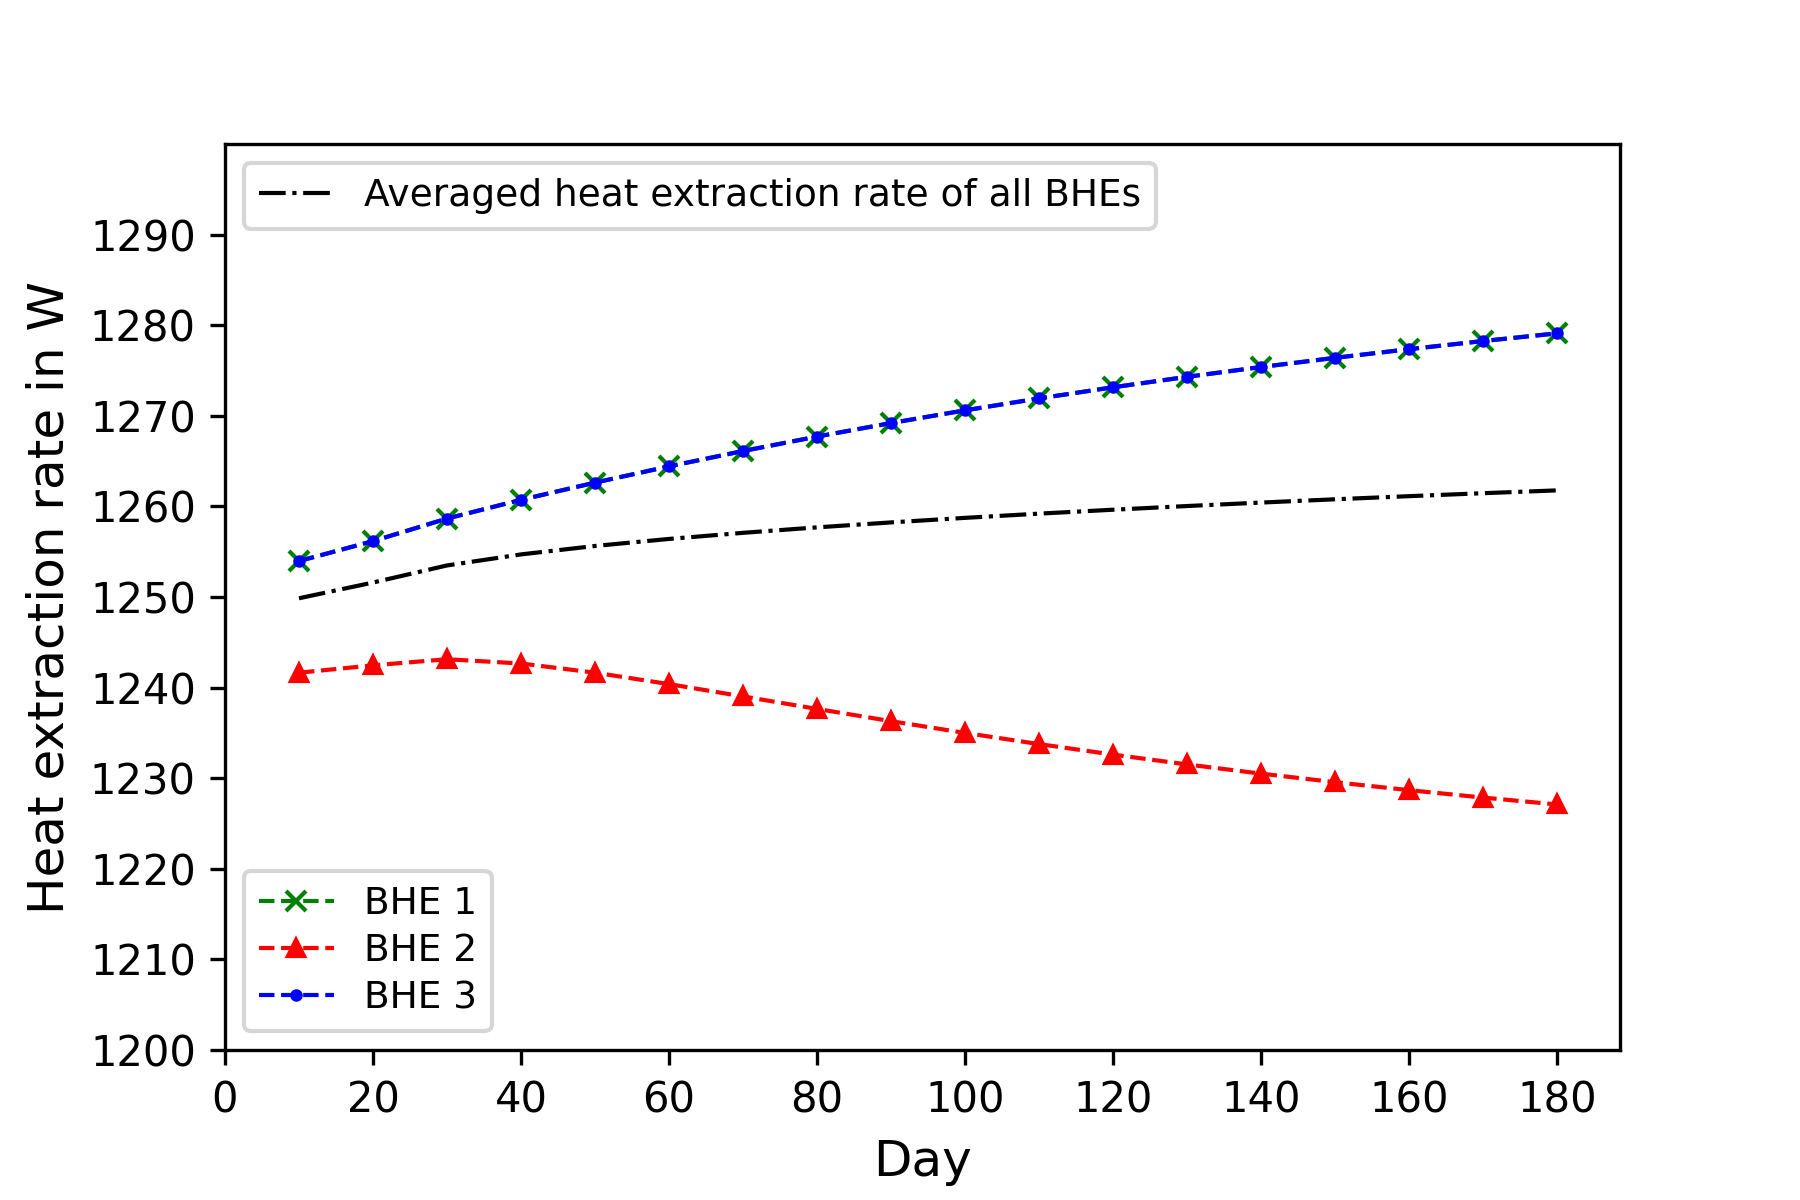 Evolution of the heat extraction rate of each BHE with close loop network model